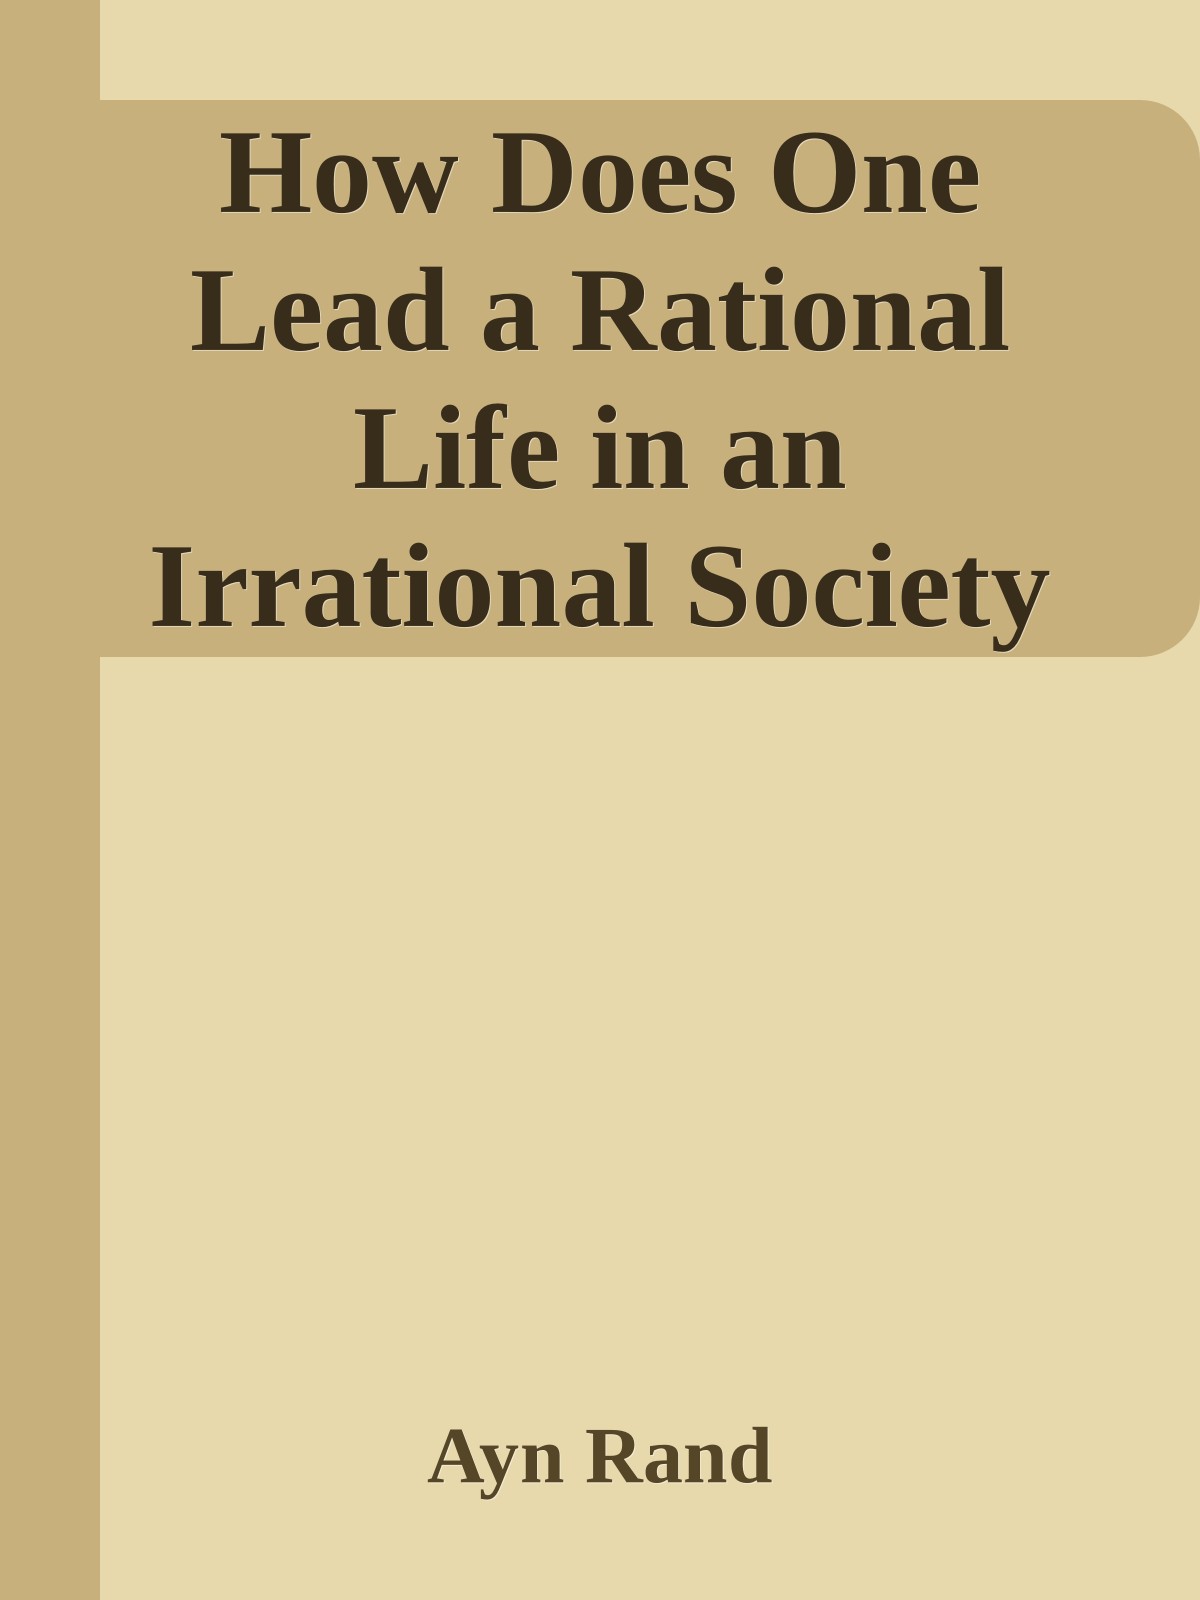 How Does One Lead a Rational Life in an Irrational Society